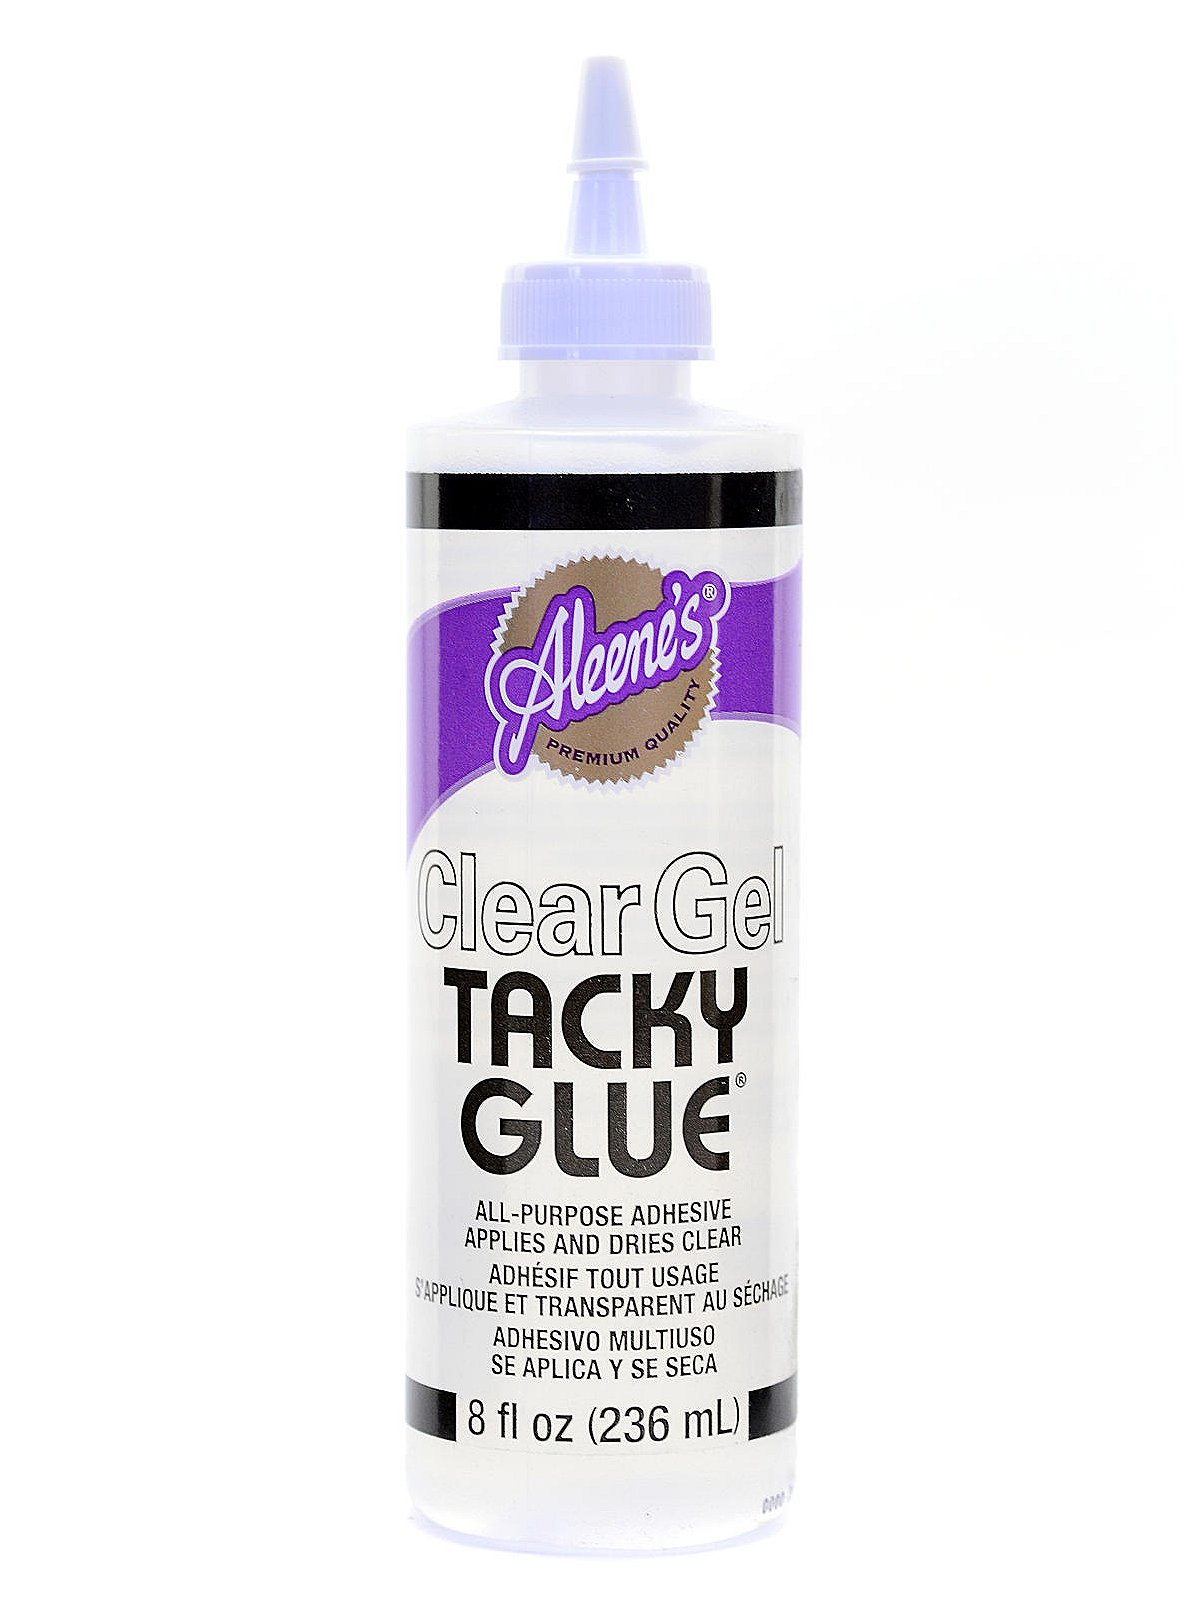 Aleene's Quick Dry Tacky Glue for Crafts